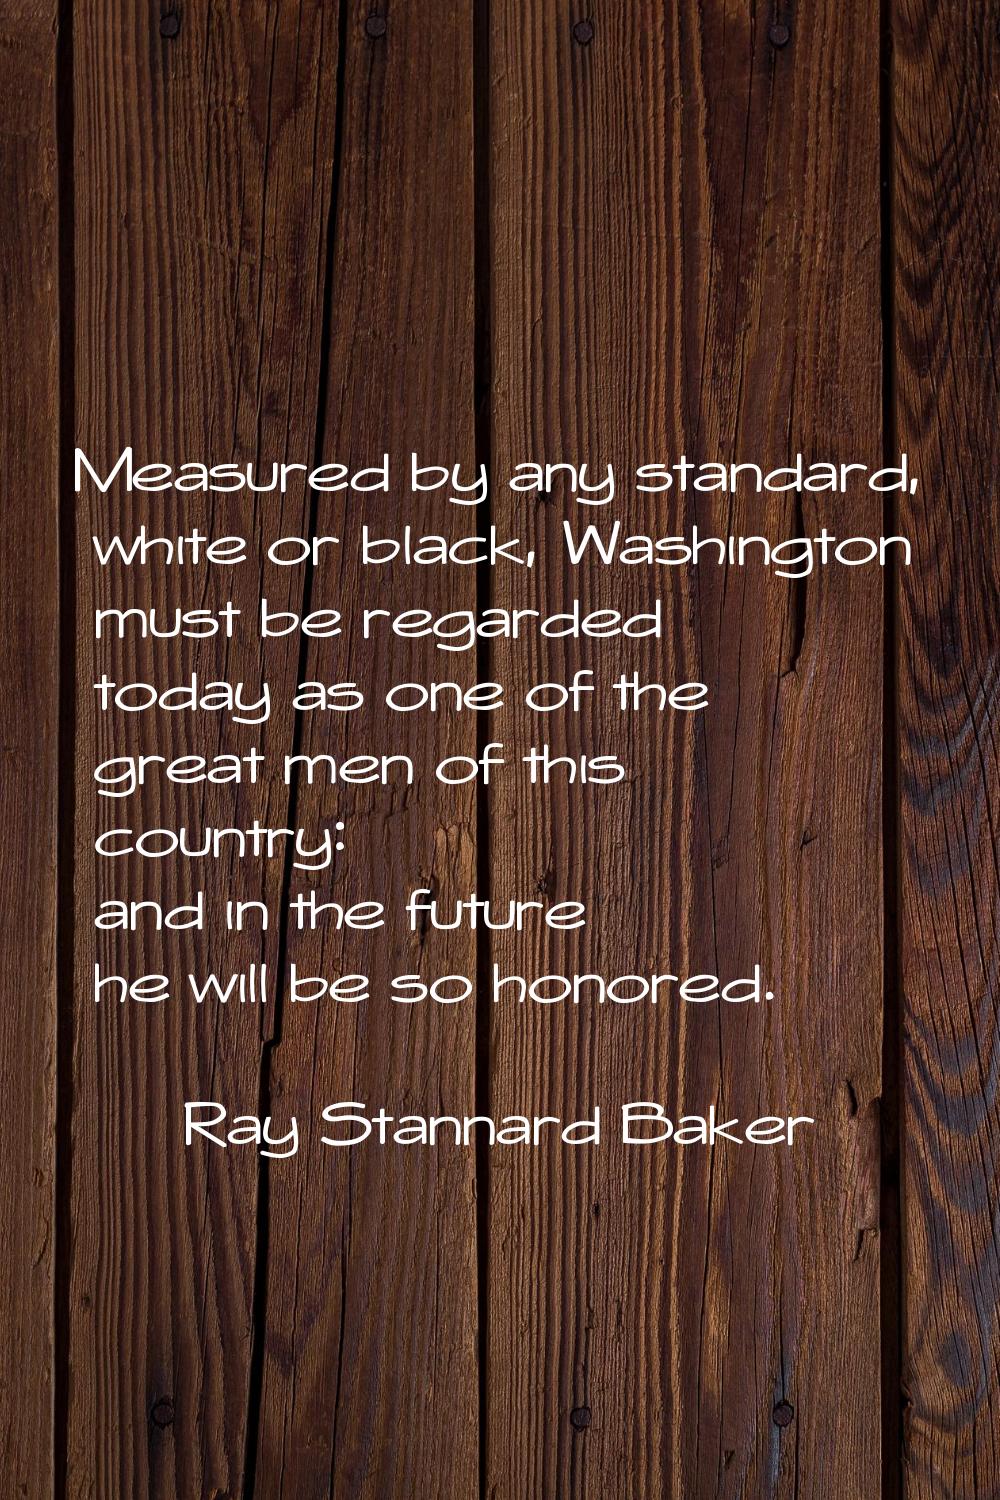 Measured by any standard, white or black, Washington must be regarded today as one of the great men